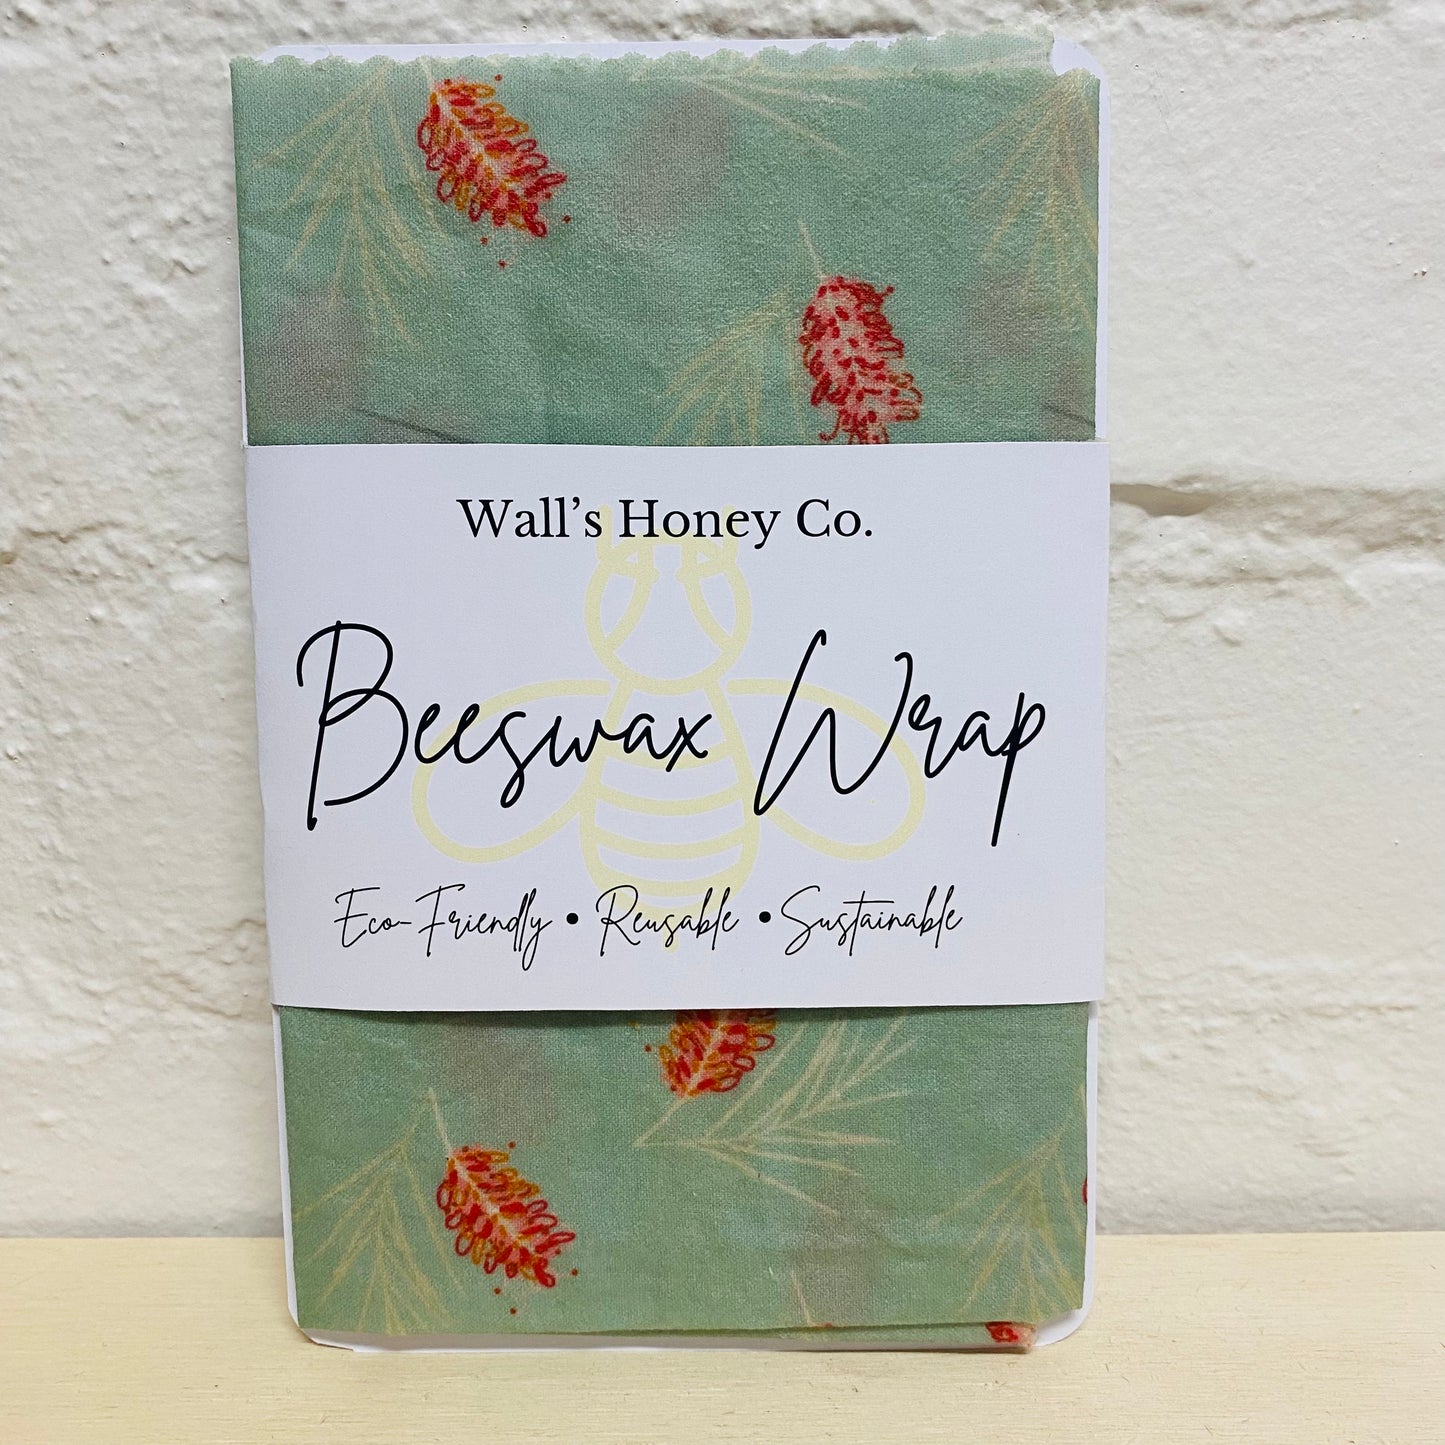 Wall's Beeswax Wrap - 1 x Large (35cm x 35xm)